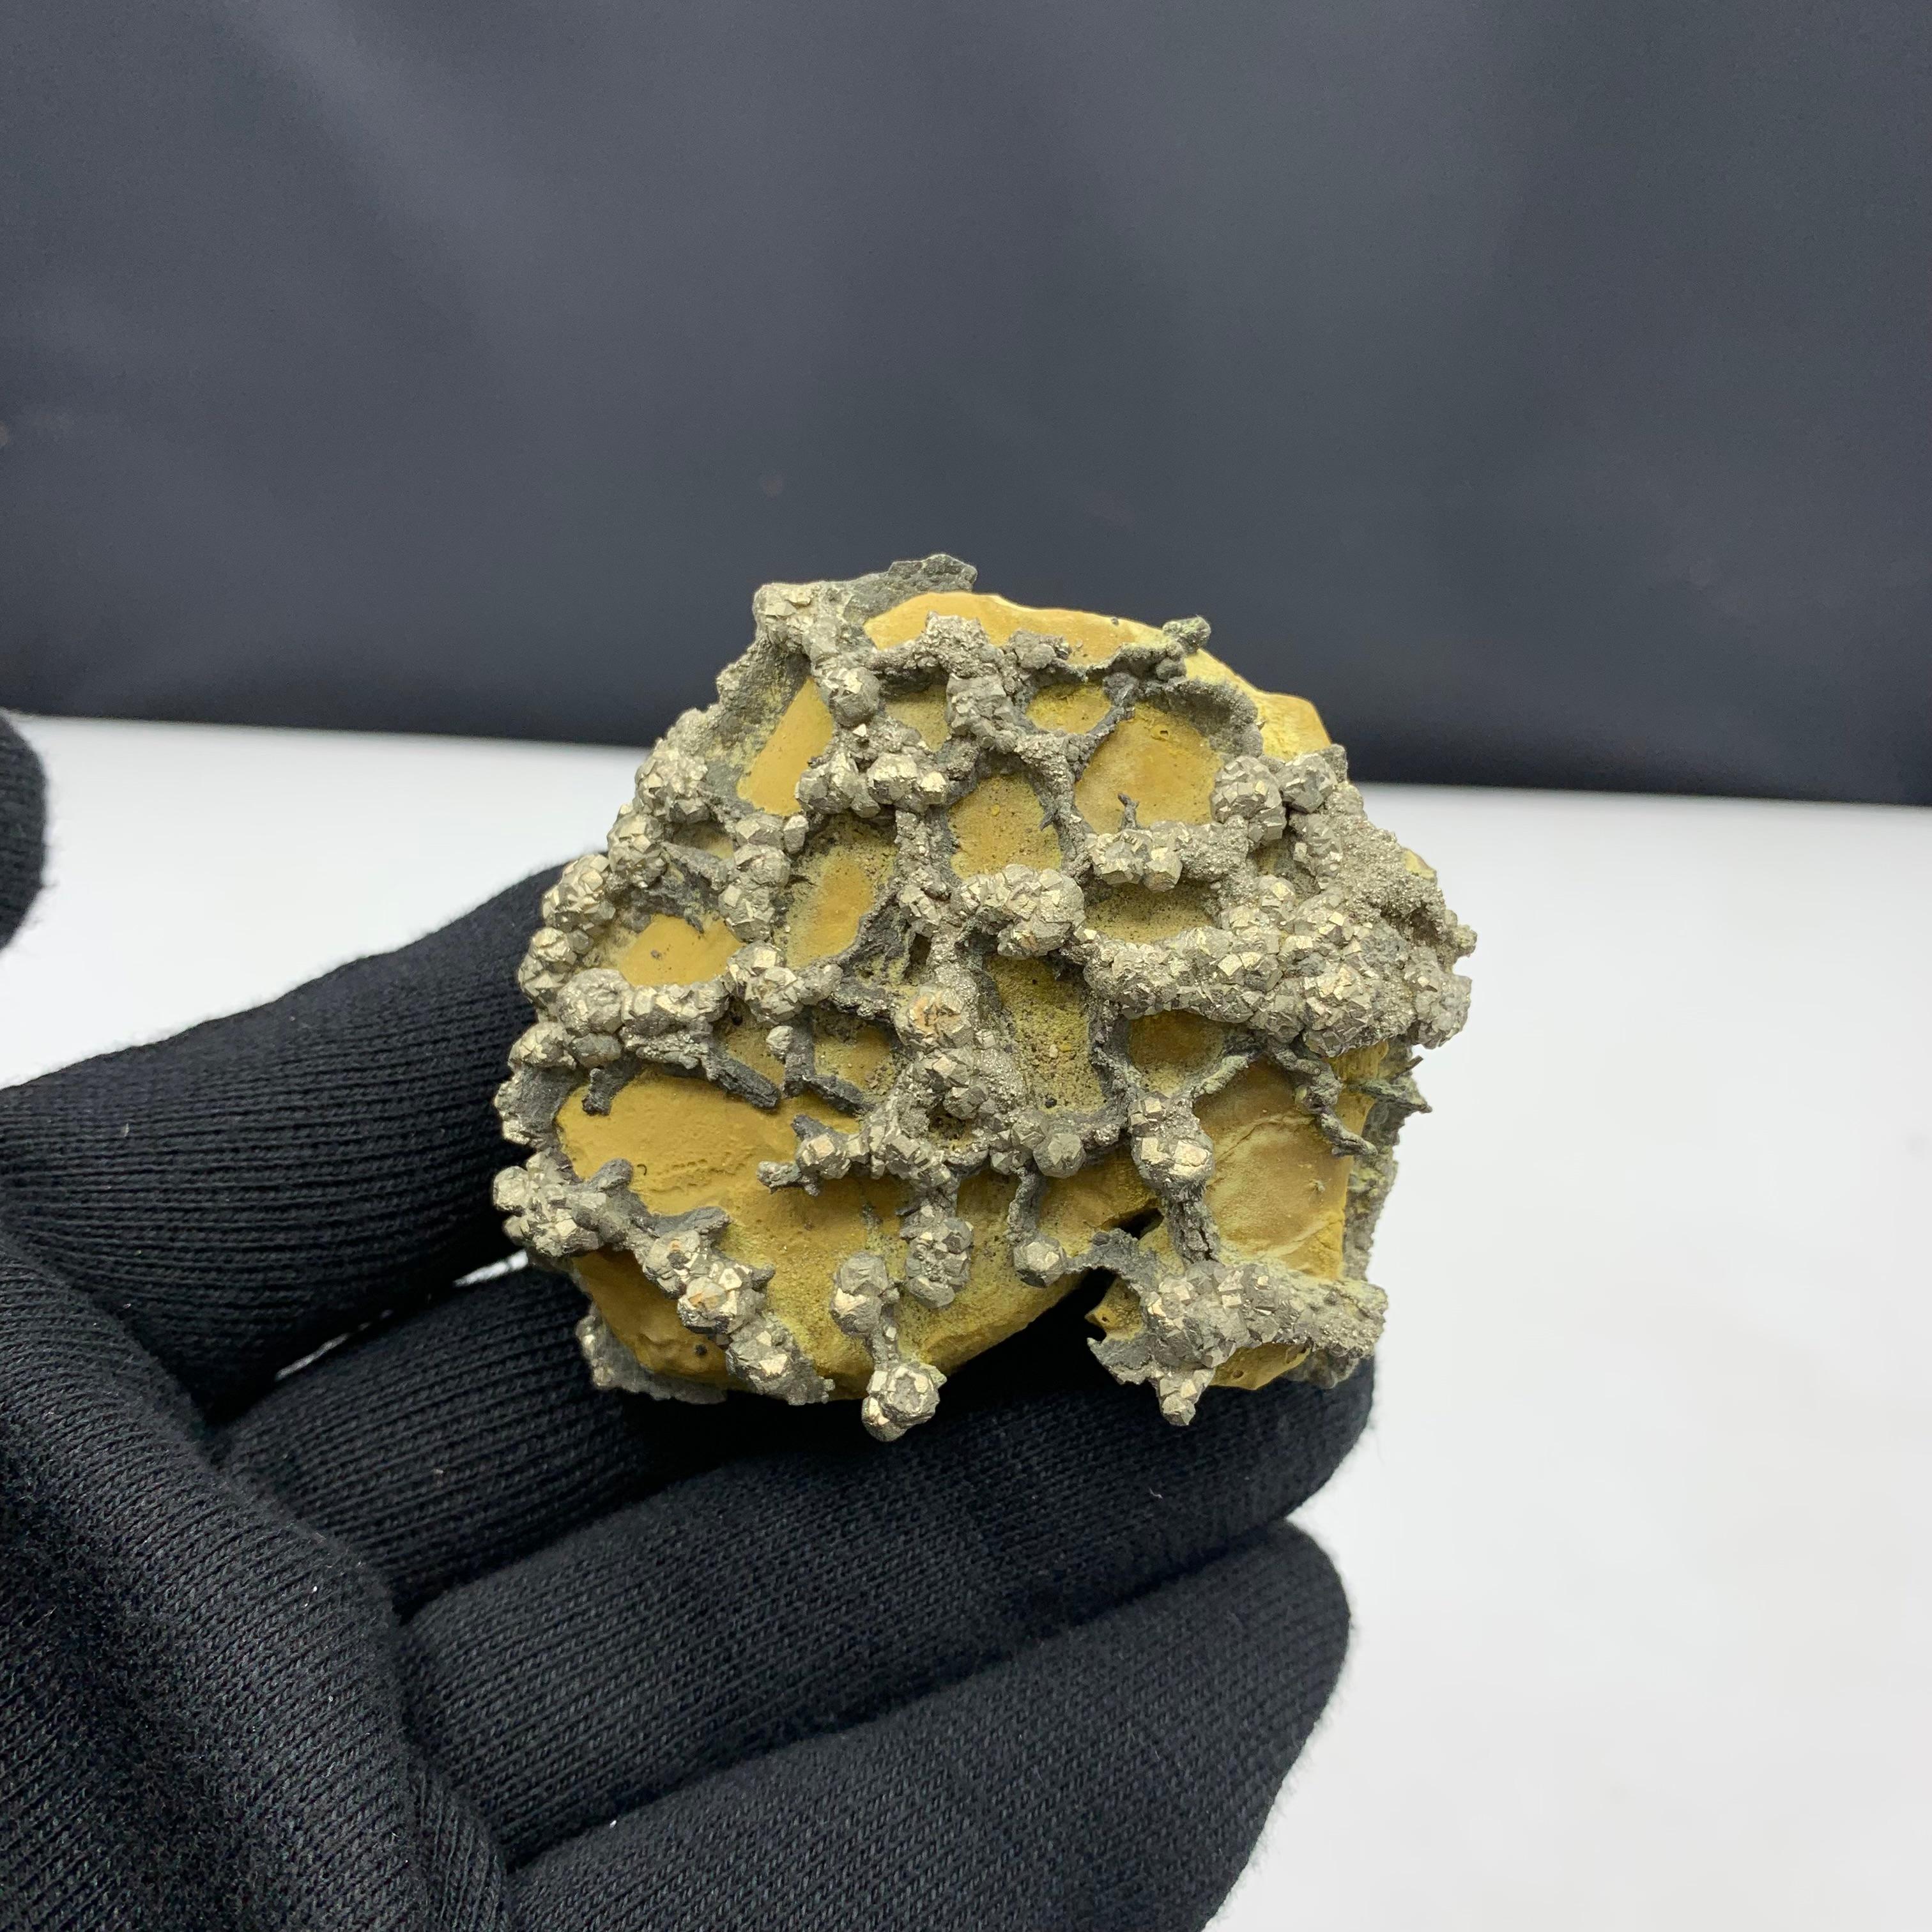 Other 218.47 Gram Attractive Pyrite Specimen From Pakistan For Sale